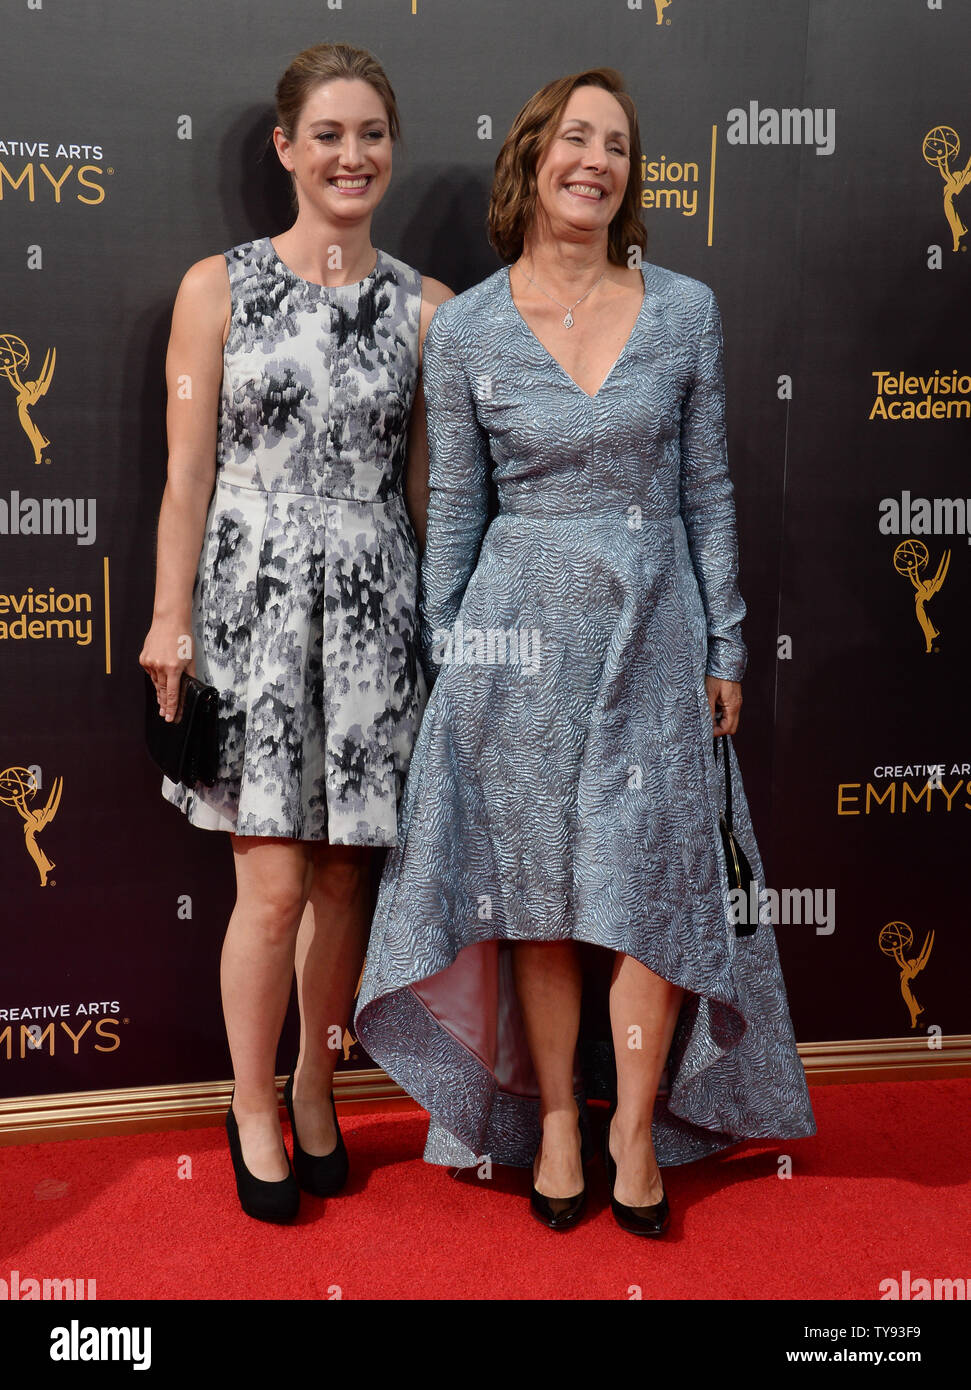 Actresses Zoe Perry and Laurie Metcalf attend the Creative Arts Emmy Awards at Microsoft Theater in Los Angeles on September 10, 2016.  Photo by Jim Ruymen/UPI Stock Photo